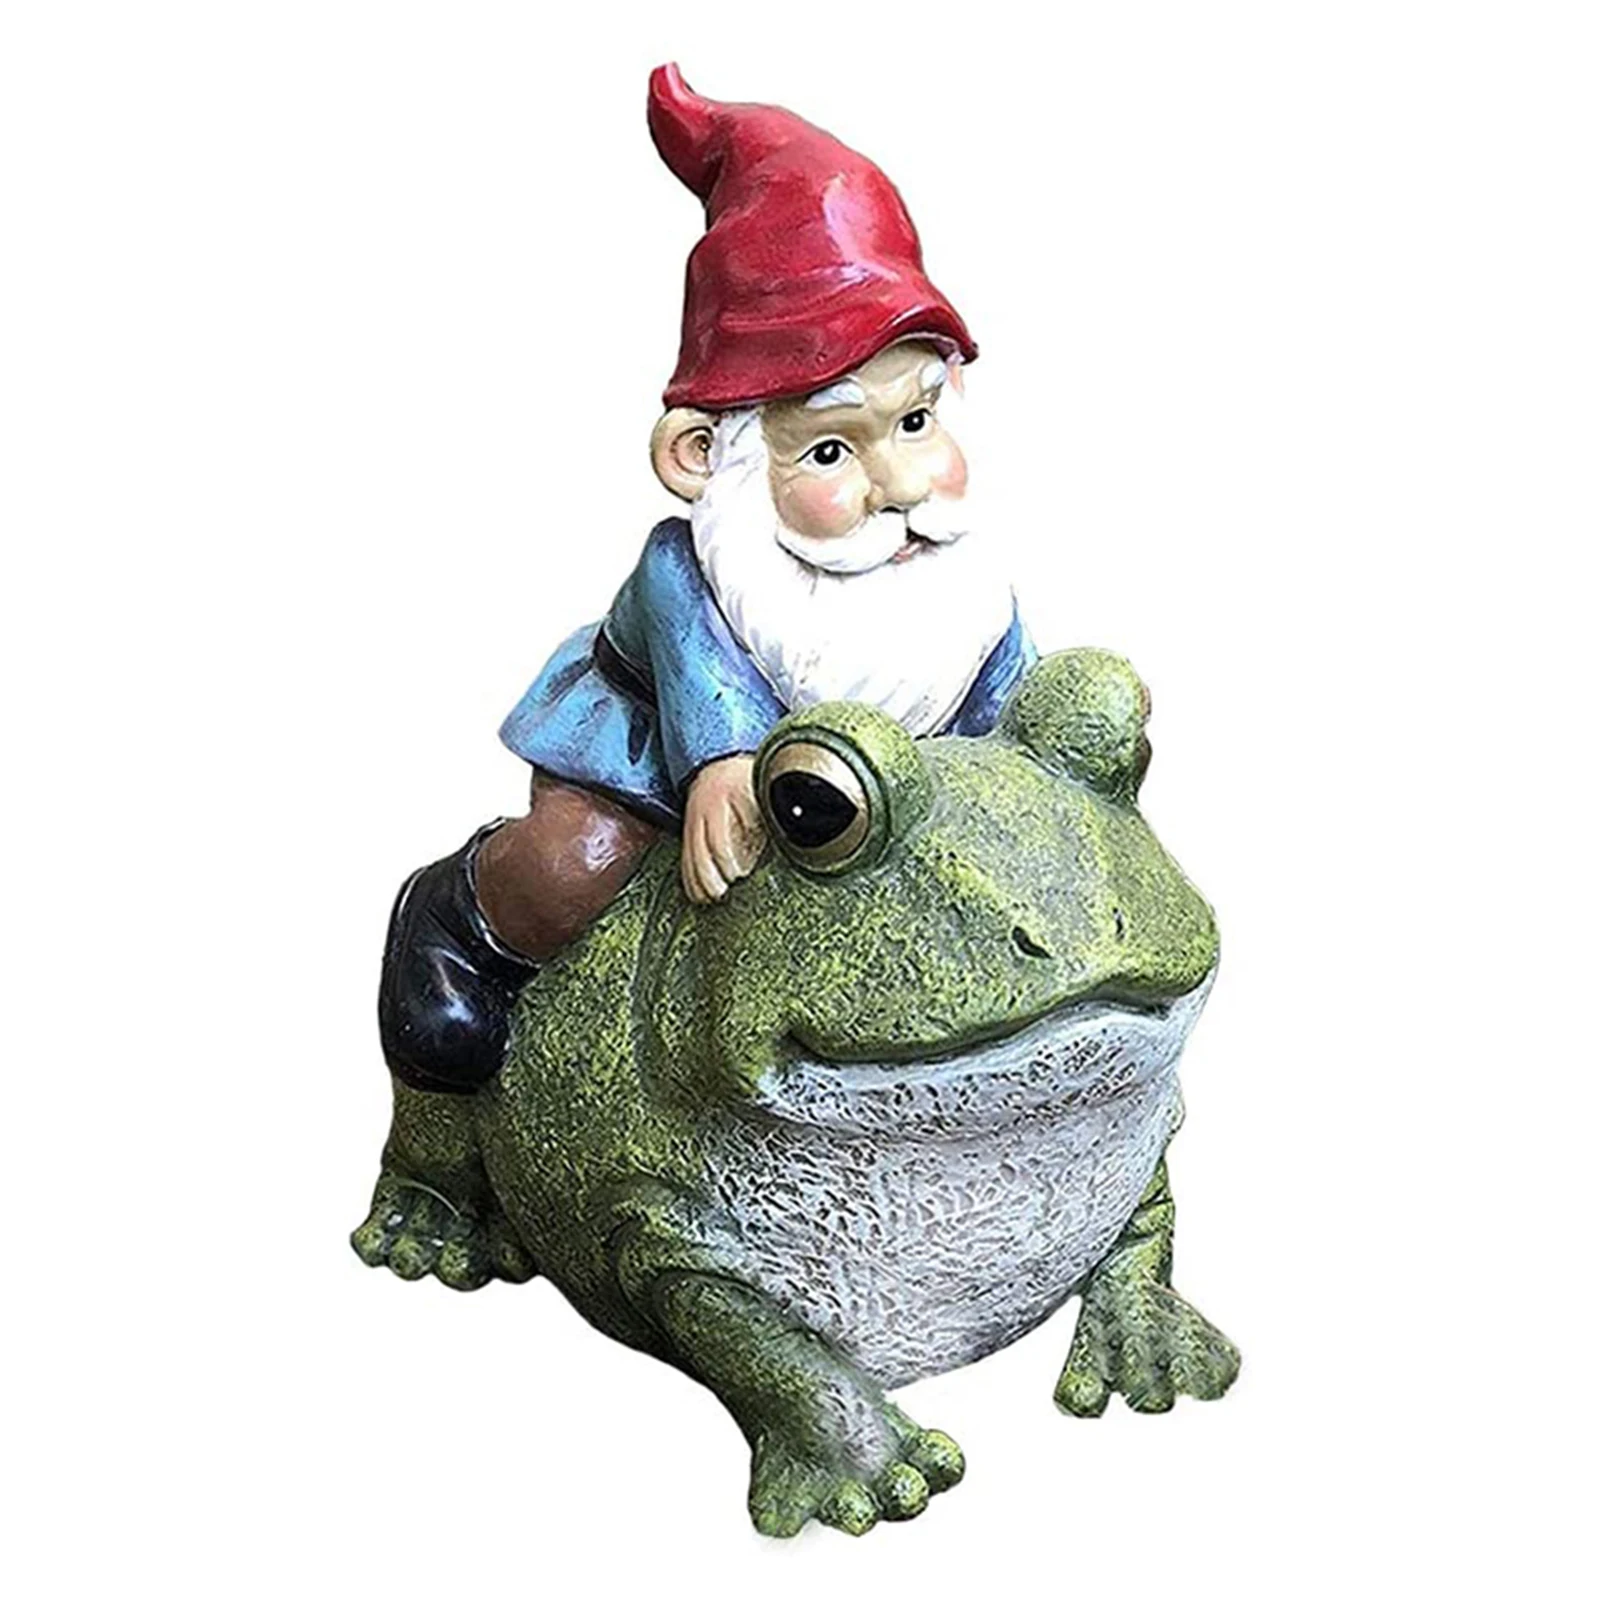 Gnome Sitting On Frog Statue Resin Garden Figurines For Outdoor Decoration Yard Super Cute Sculpture 10x5x15cm